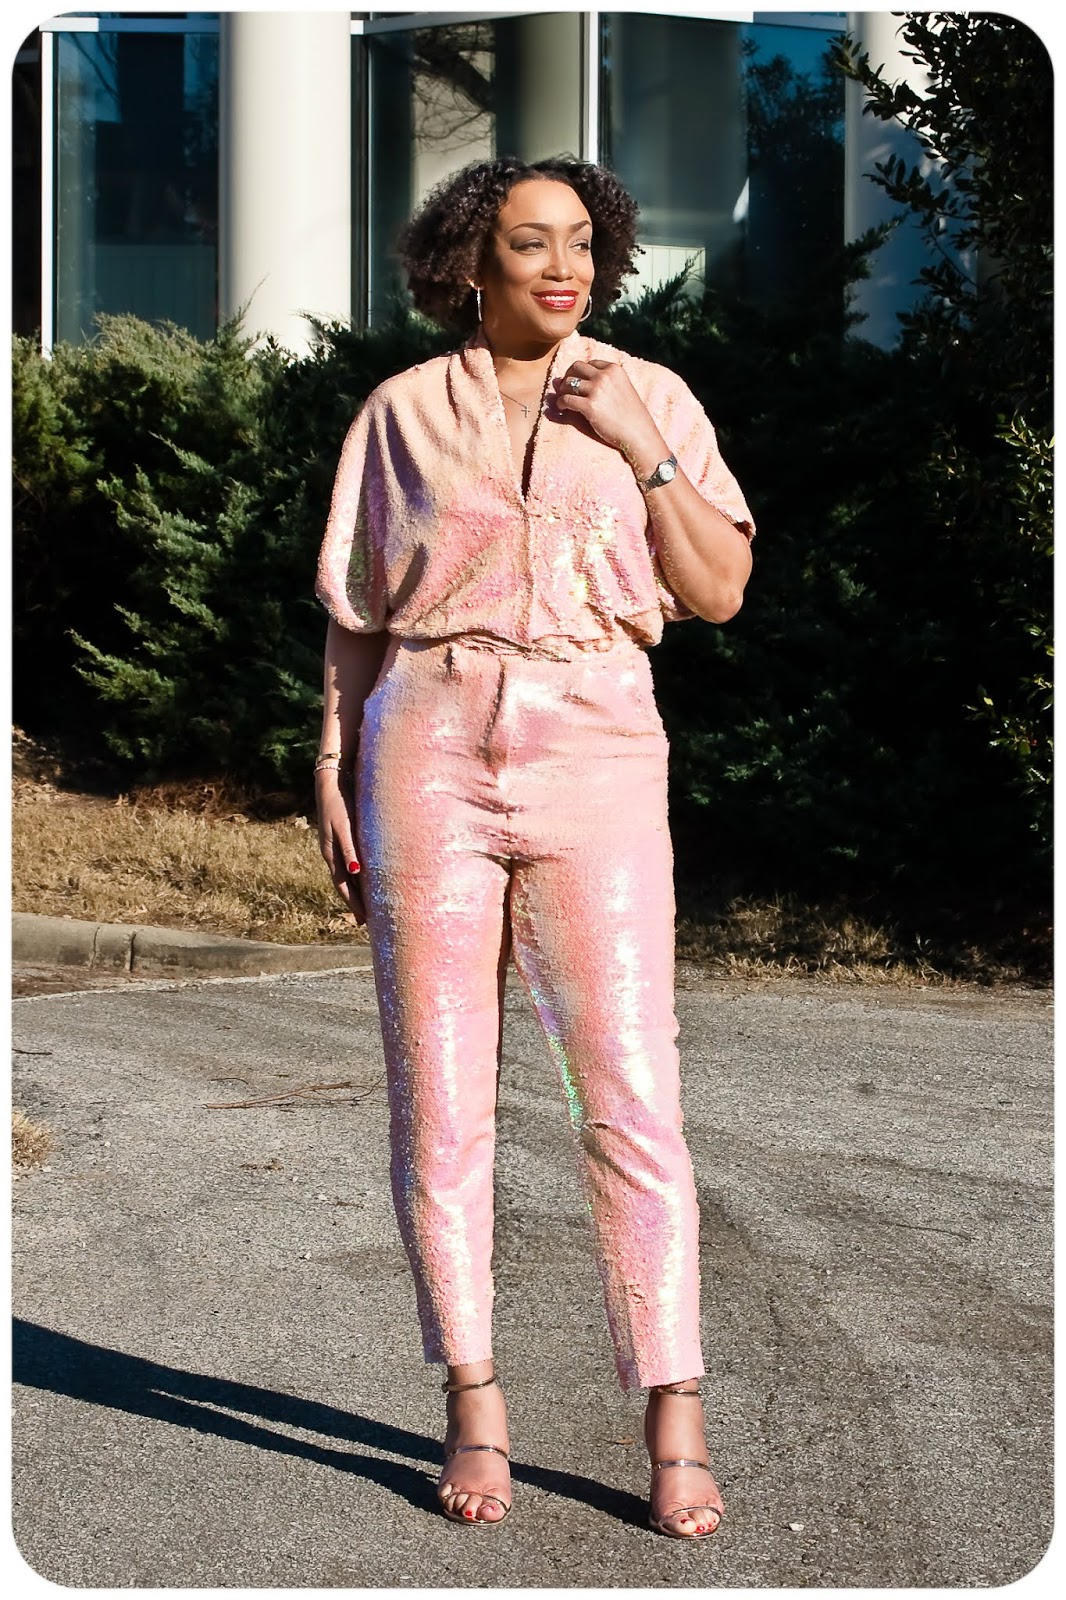 McCall's 7872 - Sequined Jumpsuit - Erica Bunker DIY Style!